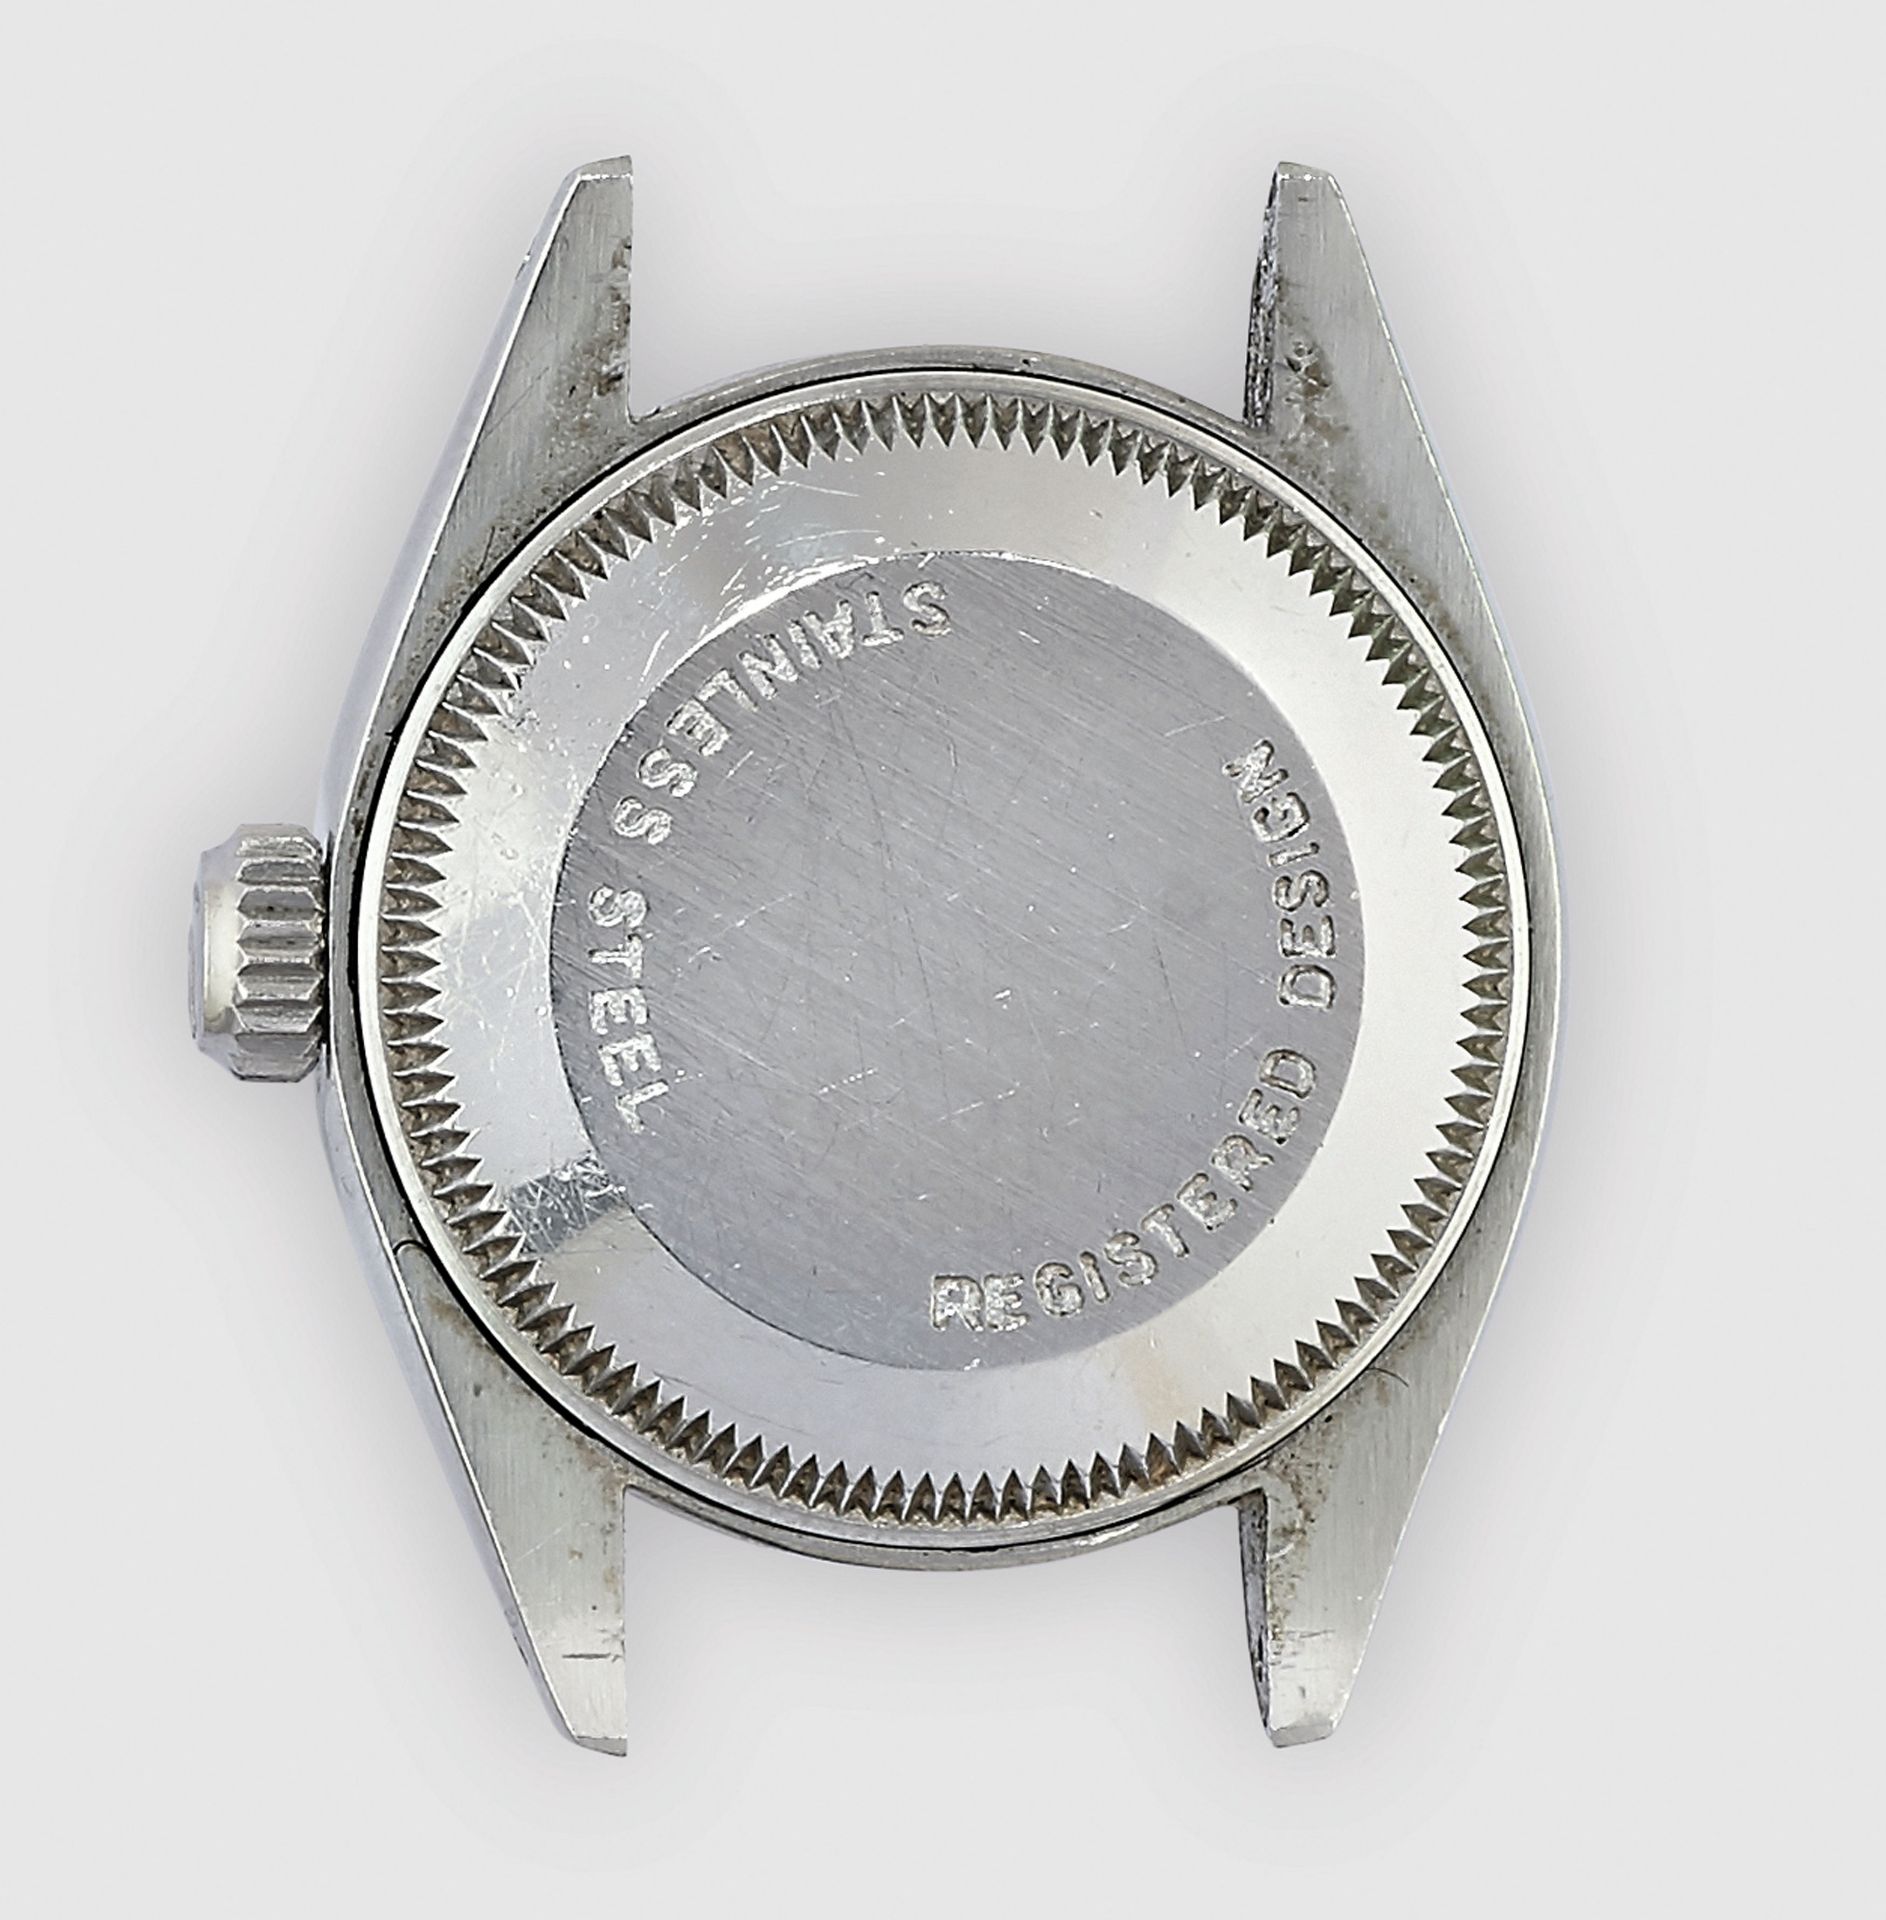 MONTRE-BRACELET ROLEX OYSTER PERPETUAL DATE RÈF 6917 - Image 3 of 6